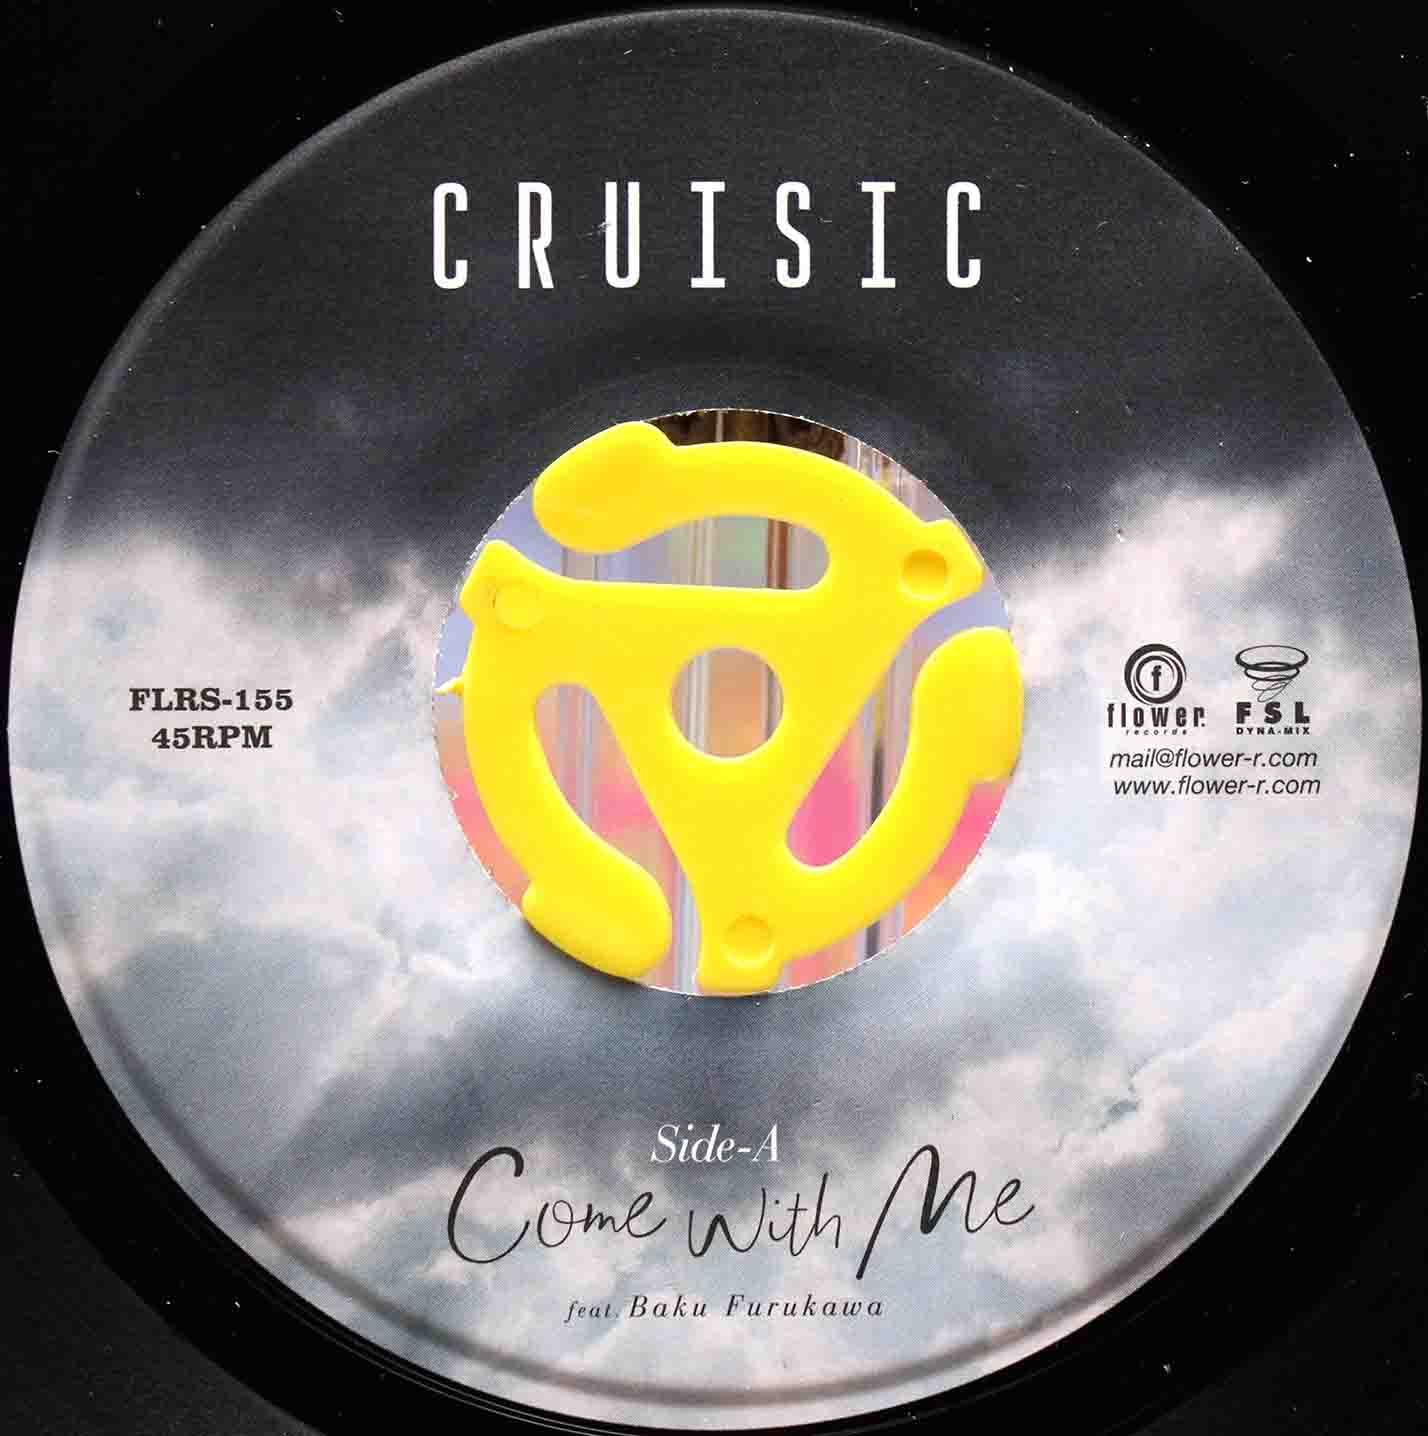 Cruisic - Come With Me 03